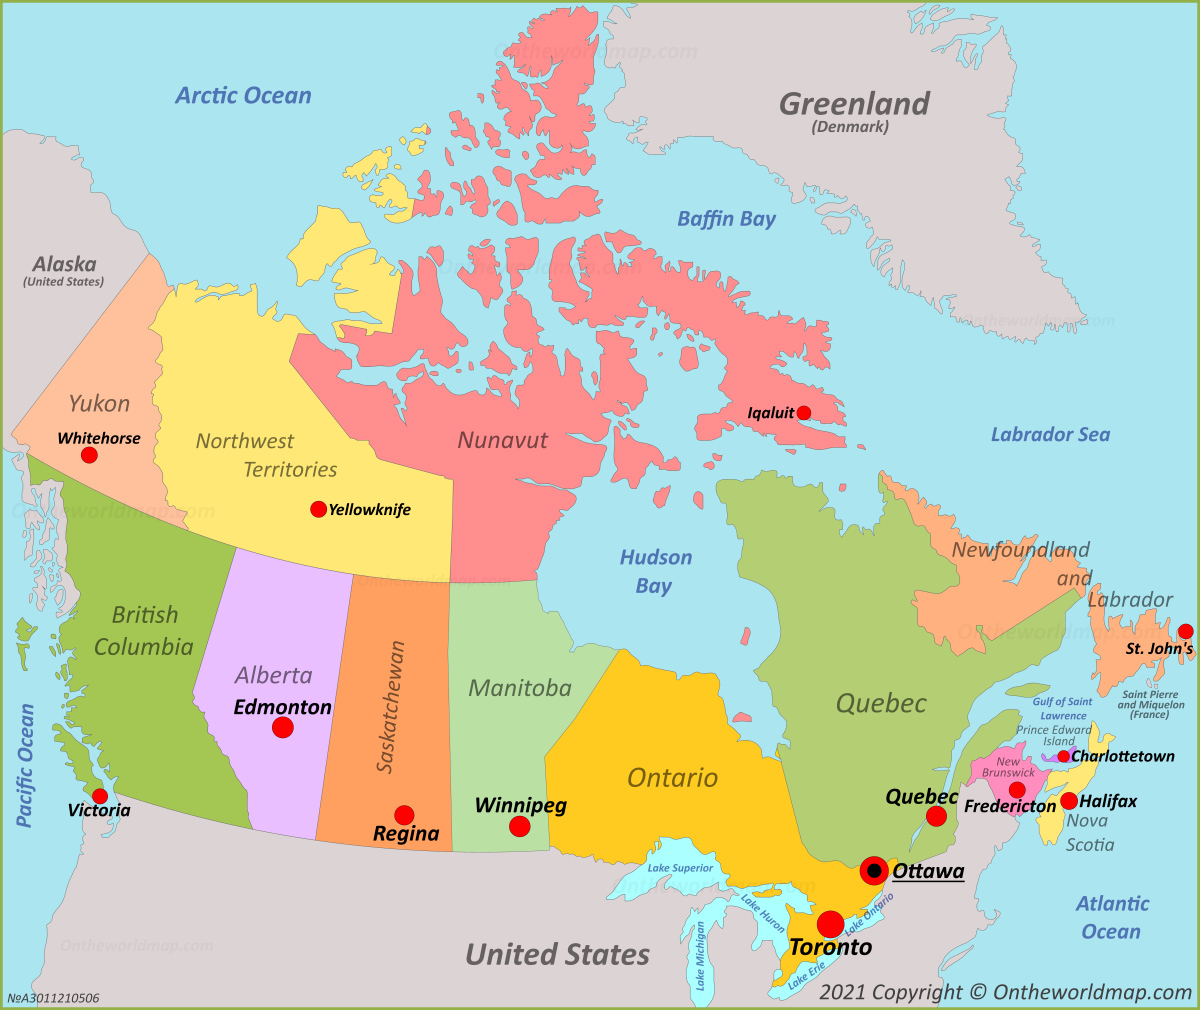 t-k-arktick-m-dn-canada-provinces-and-territories-map-kletba